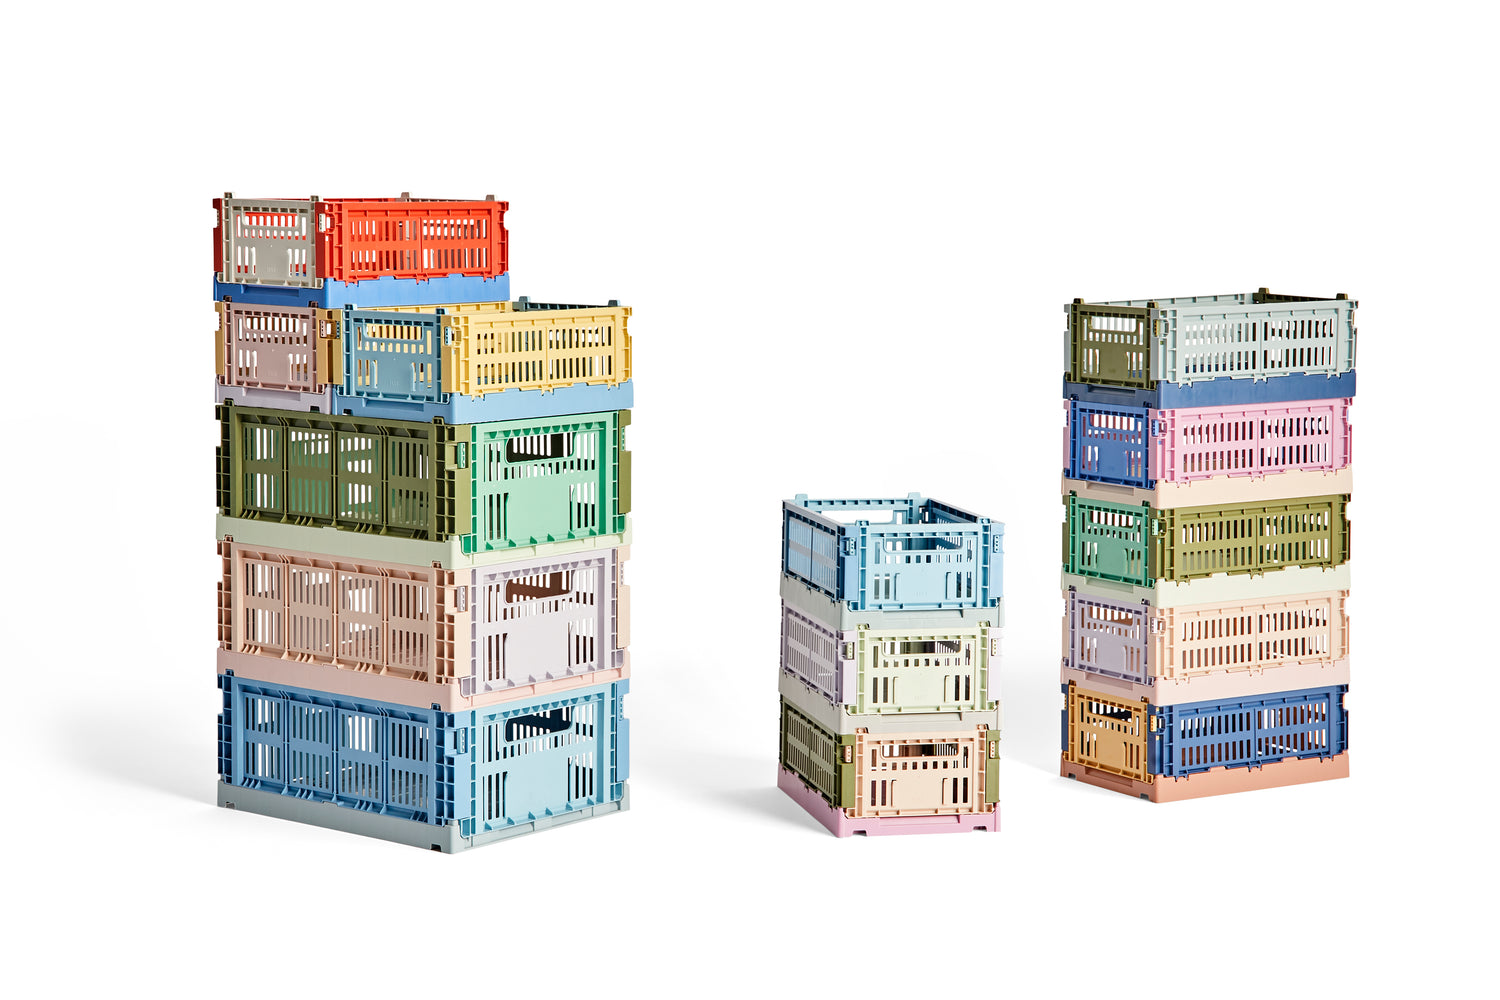 The Colour Crate Mix in sizes Medium and Small stack together so that on top of the Medium you can stack 2 Small crates side by side.